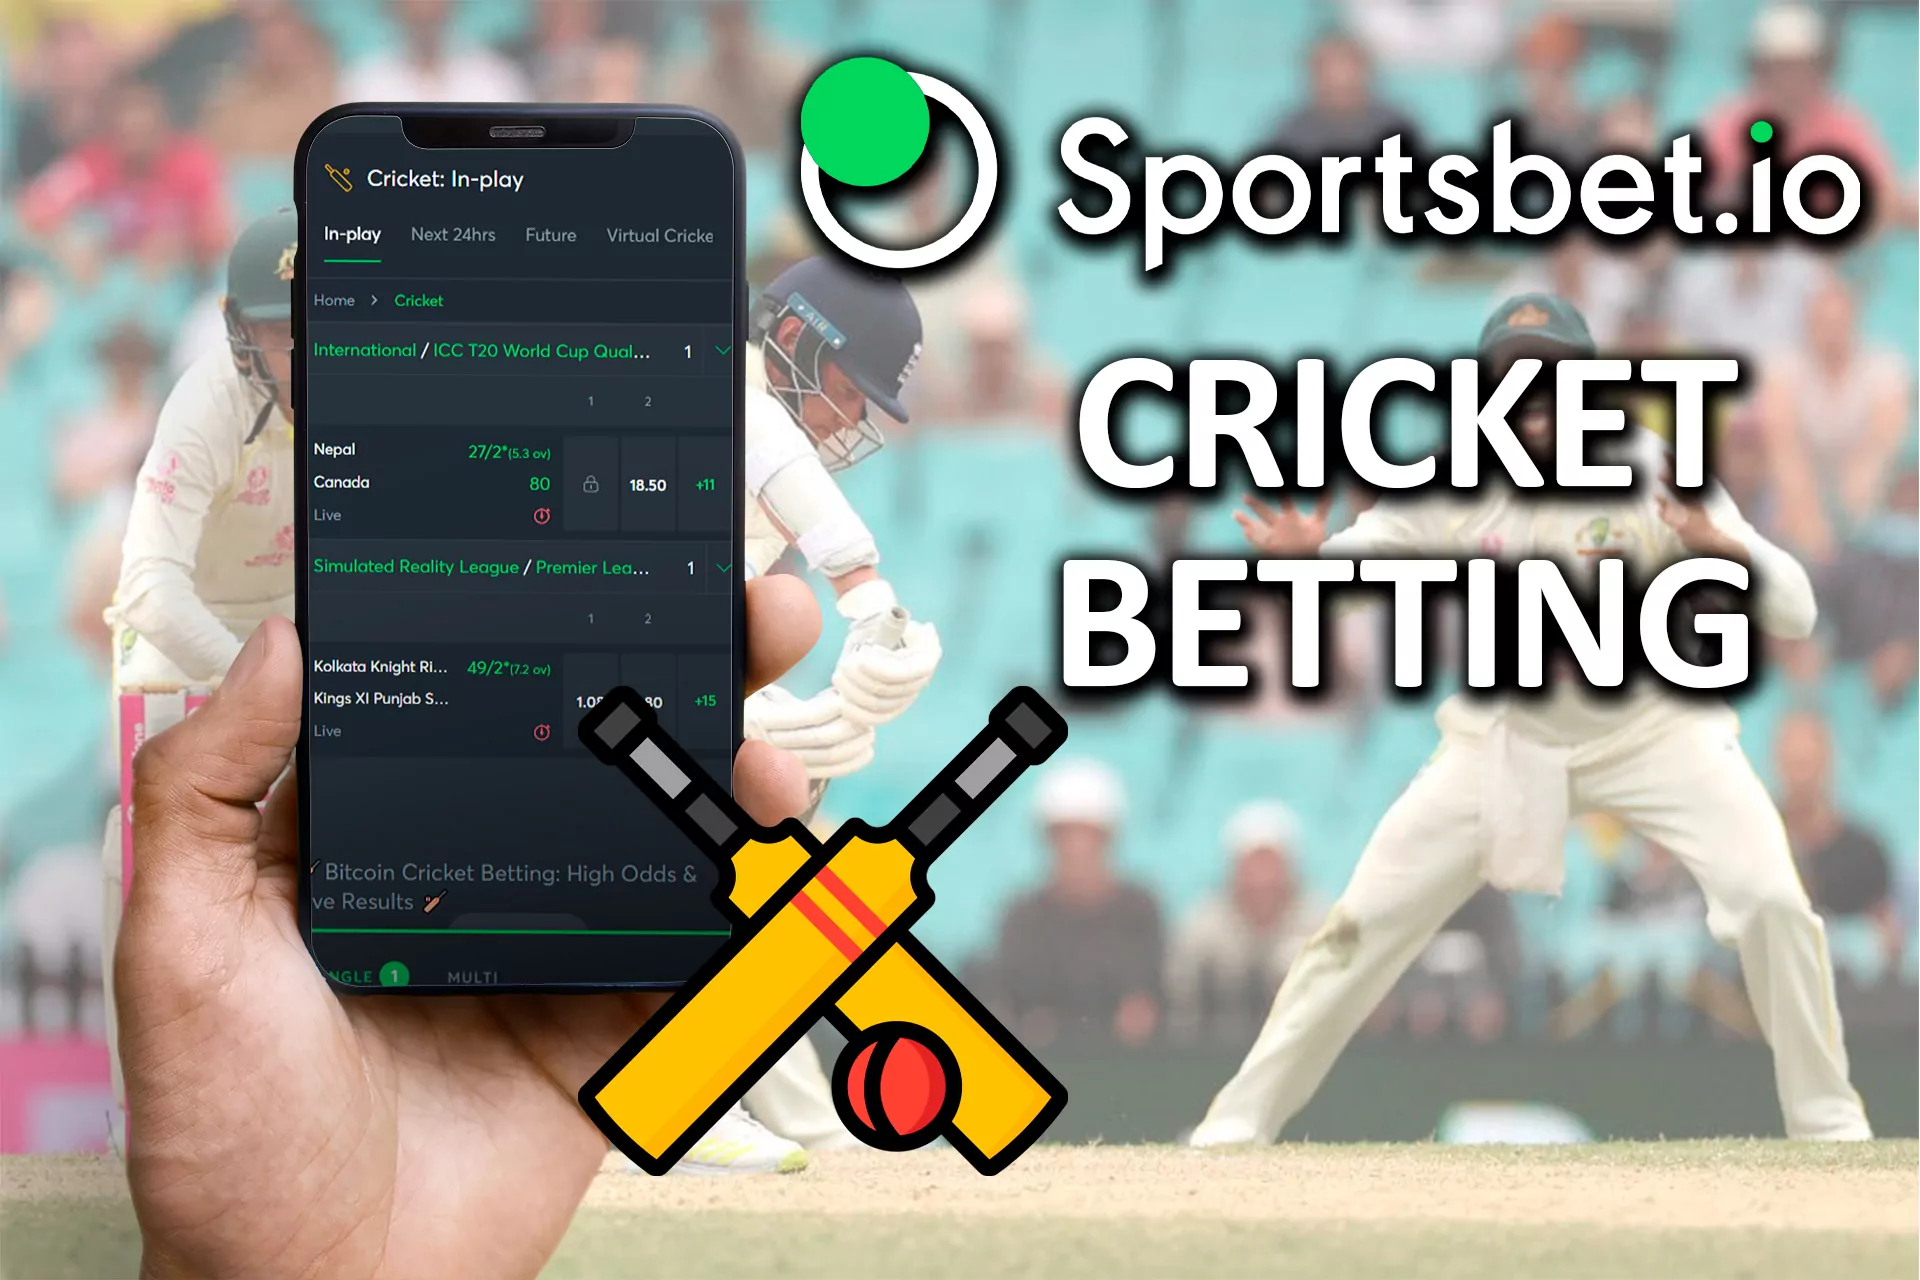 Bet on cricket events and teams in the mobile app.